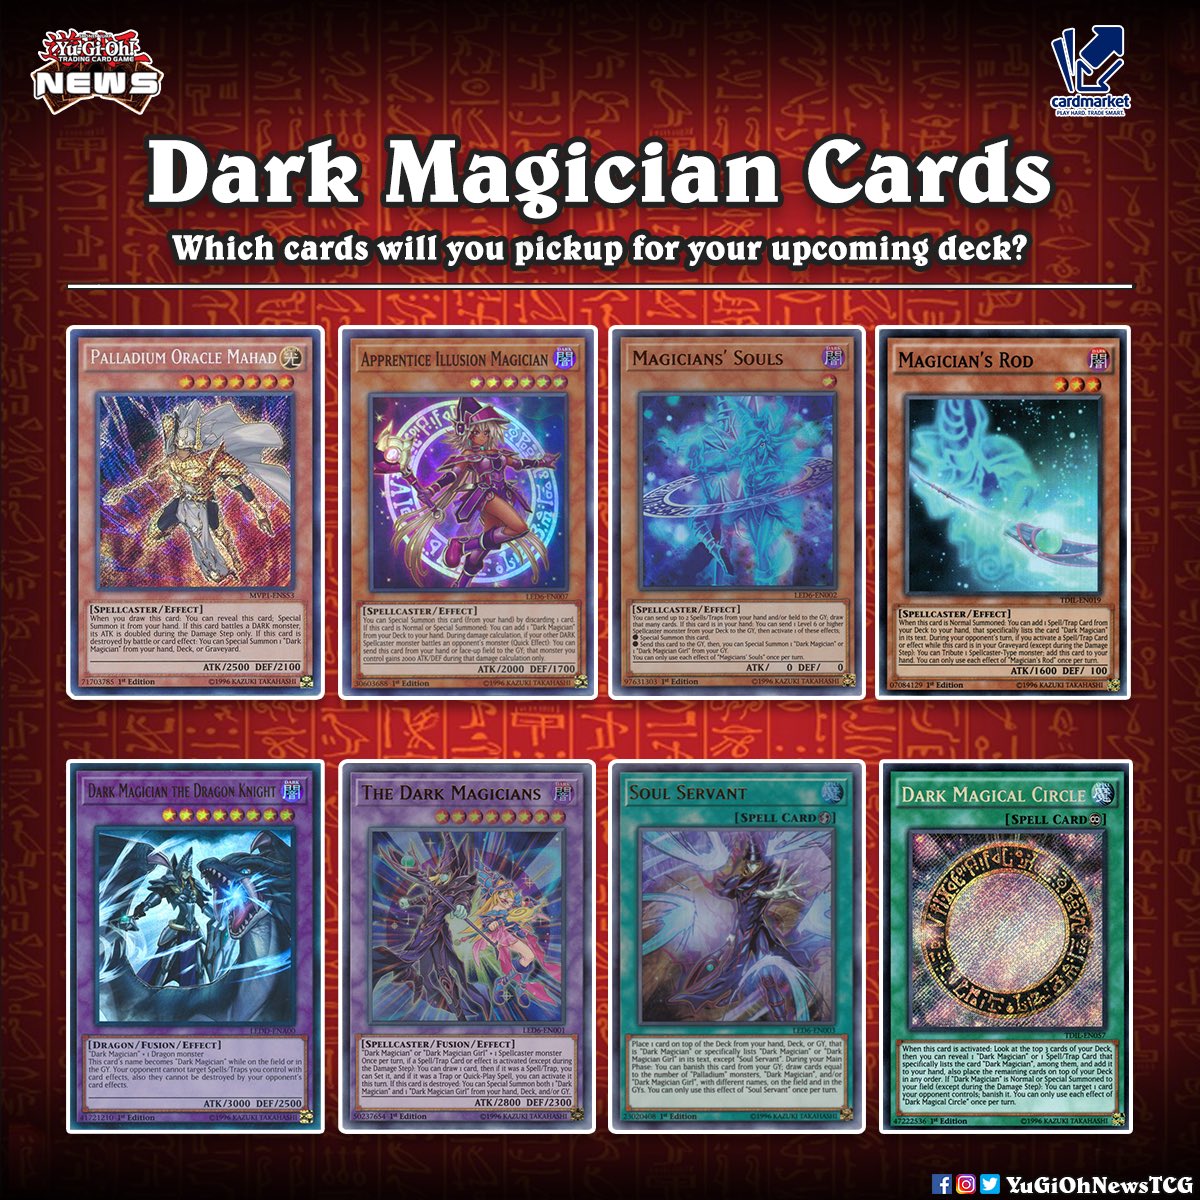 YuGiOh News on Twitter: "❰𝗖𝗔𝗥𝗗 𝗠𝗔𝗥𝗞𝗘𝗧❱ Due to the upcoming  support that Dark Magician will get, here are some cards you should keep  your eyes on 👀 To get these cards check @